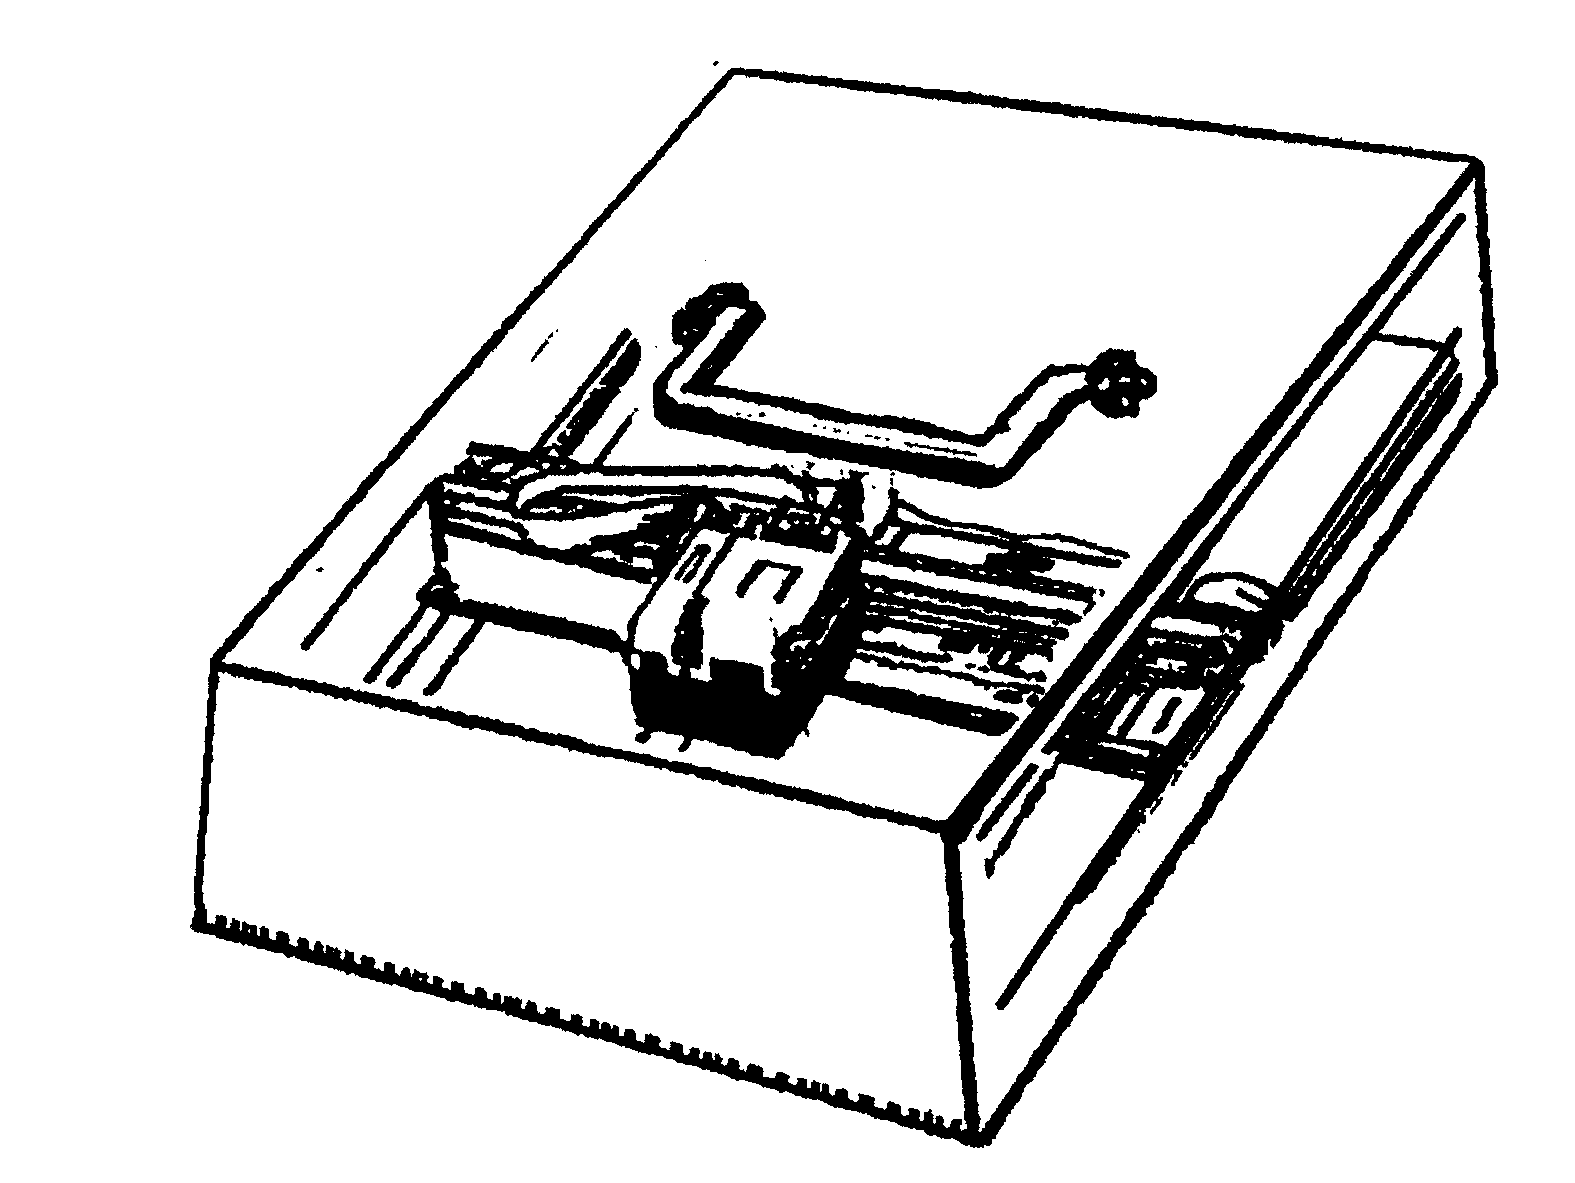 Covered type ink-jet printer